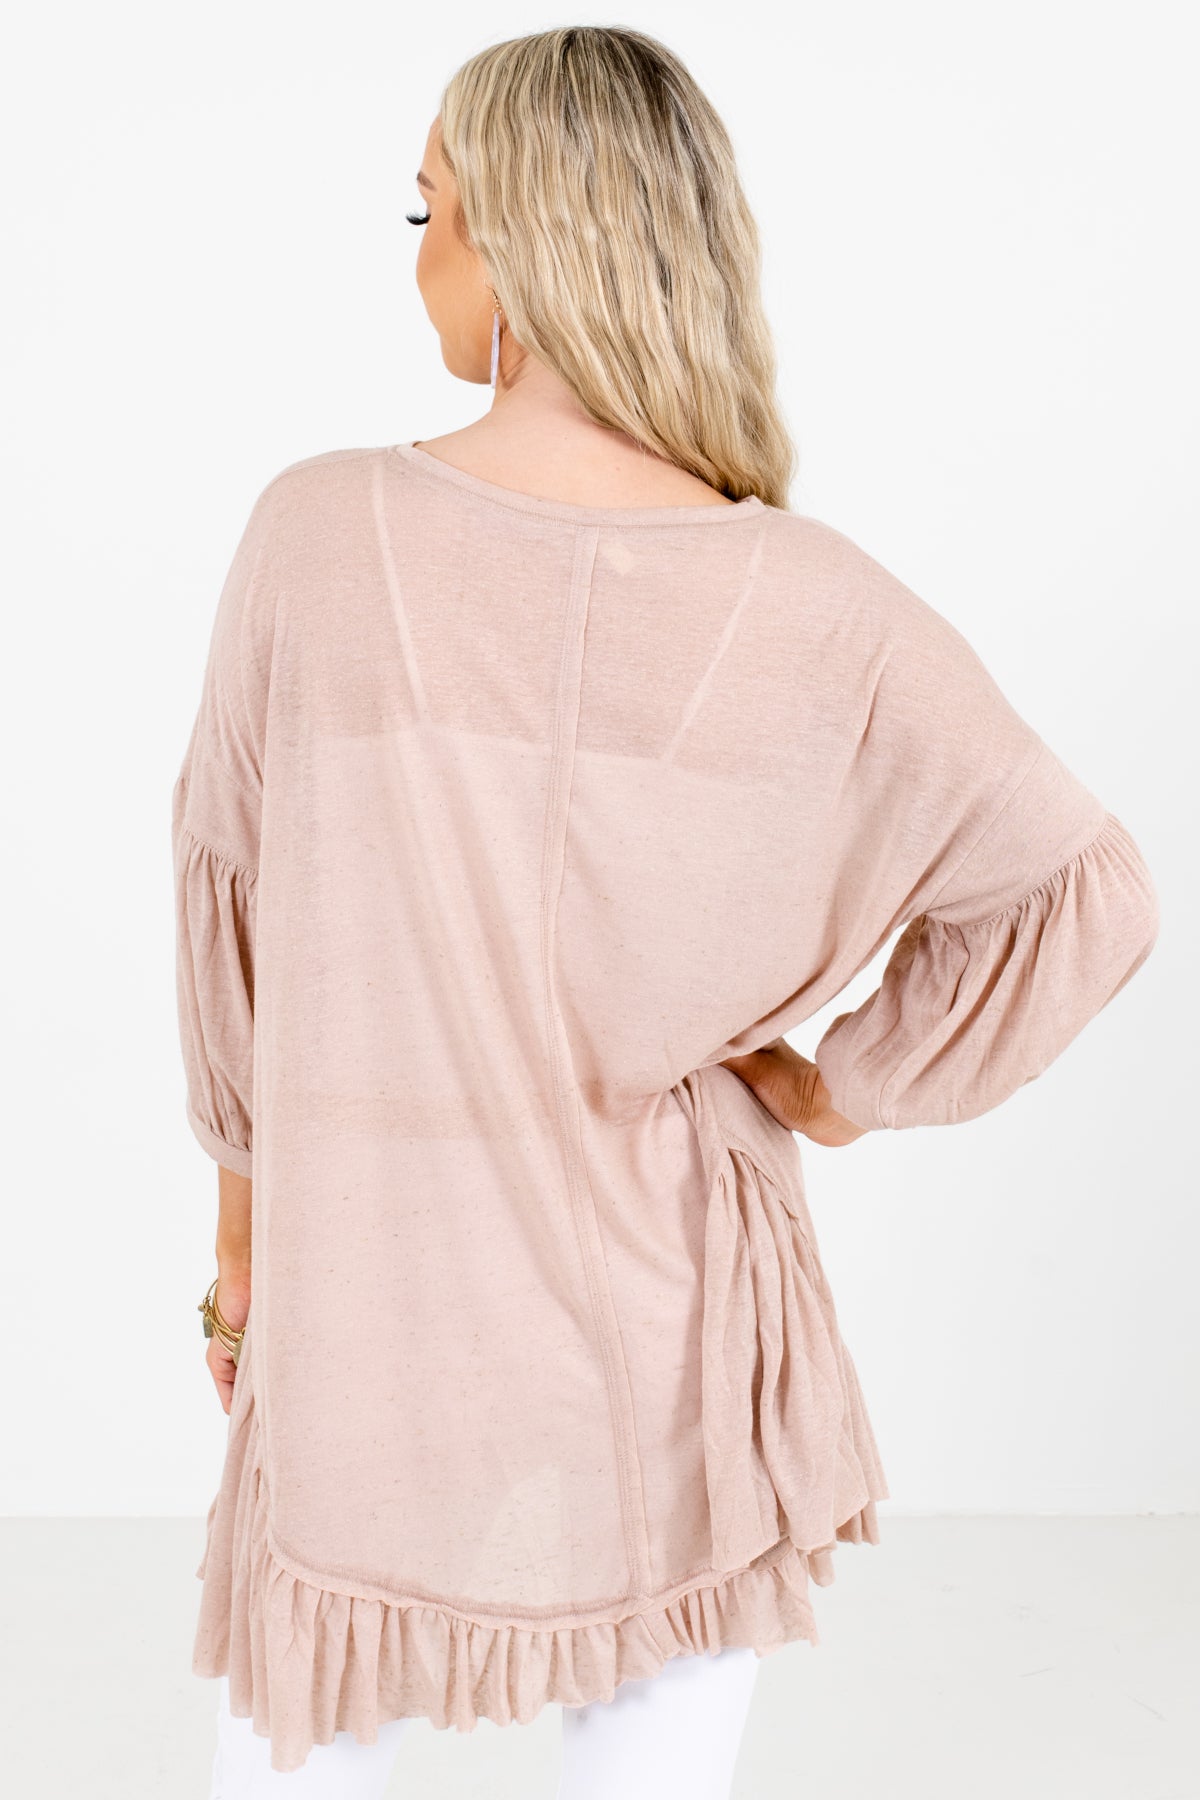 Women's Beige Pleated Accented Boutique Top